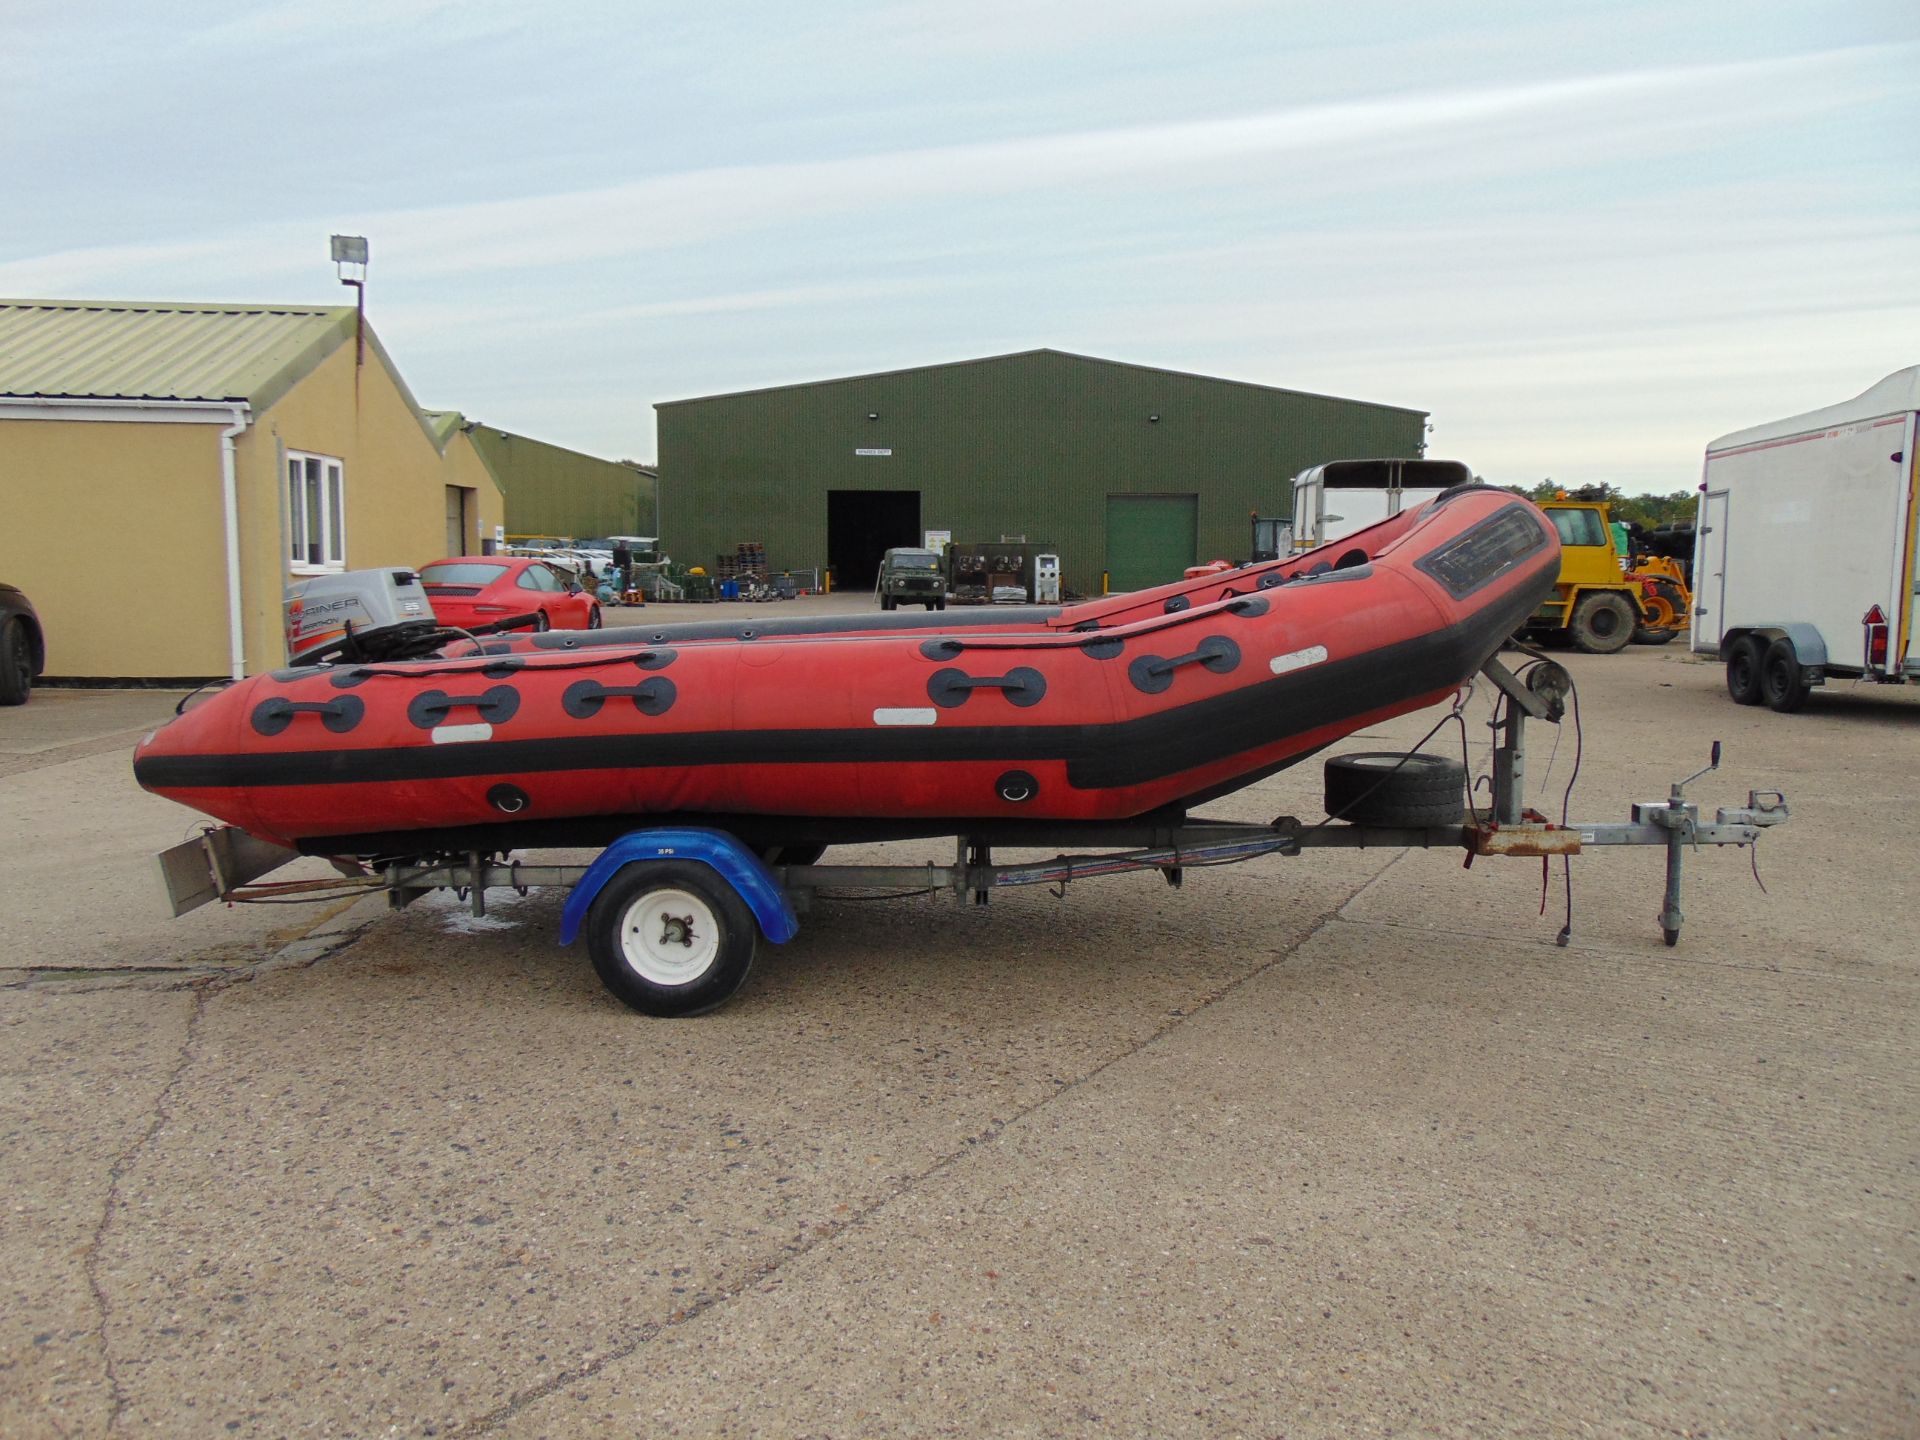 Eurocraft 440 Inflatable Rib C/W Mariner Outboard Motor and Transportation Trailer - Image 8 of 26